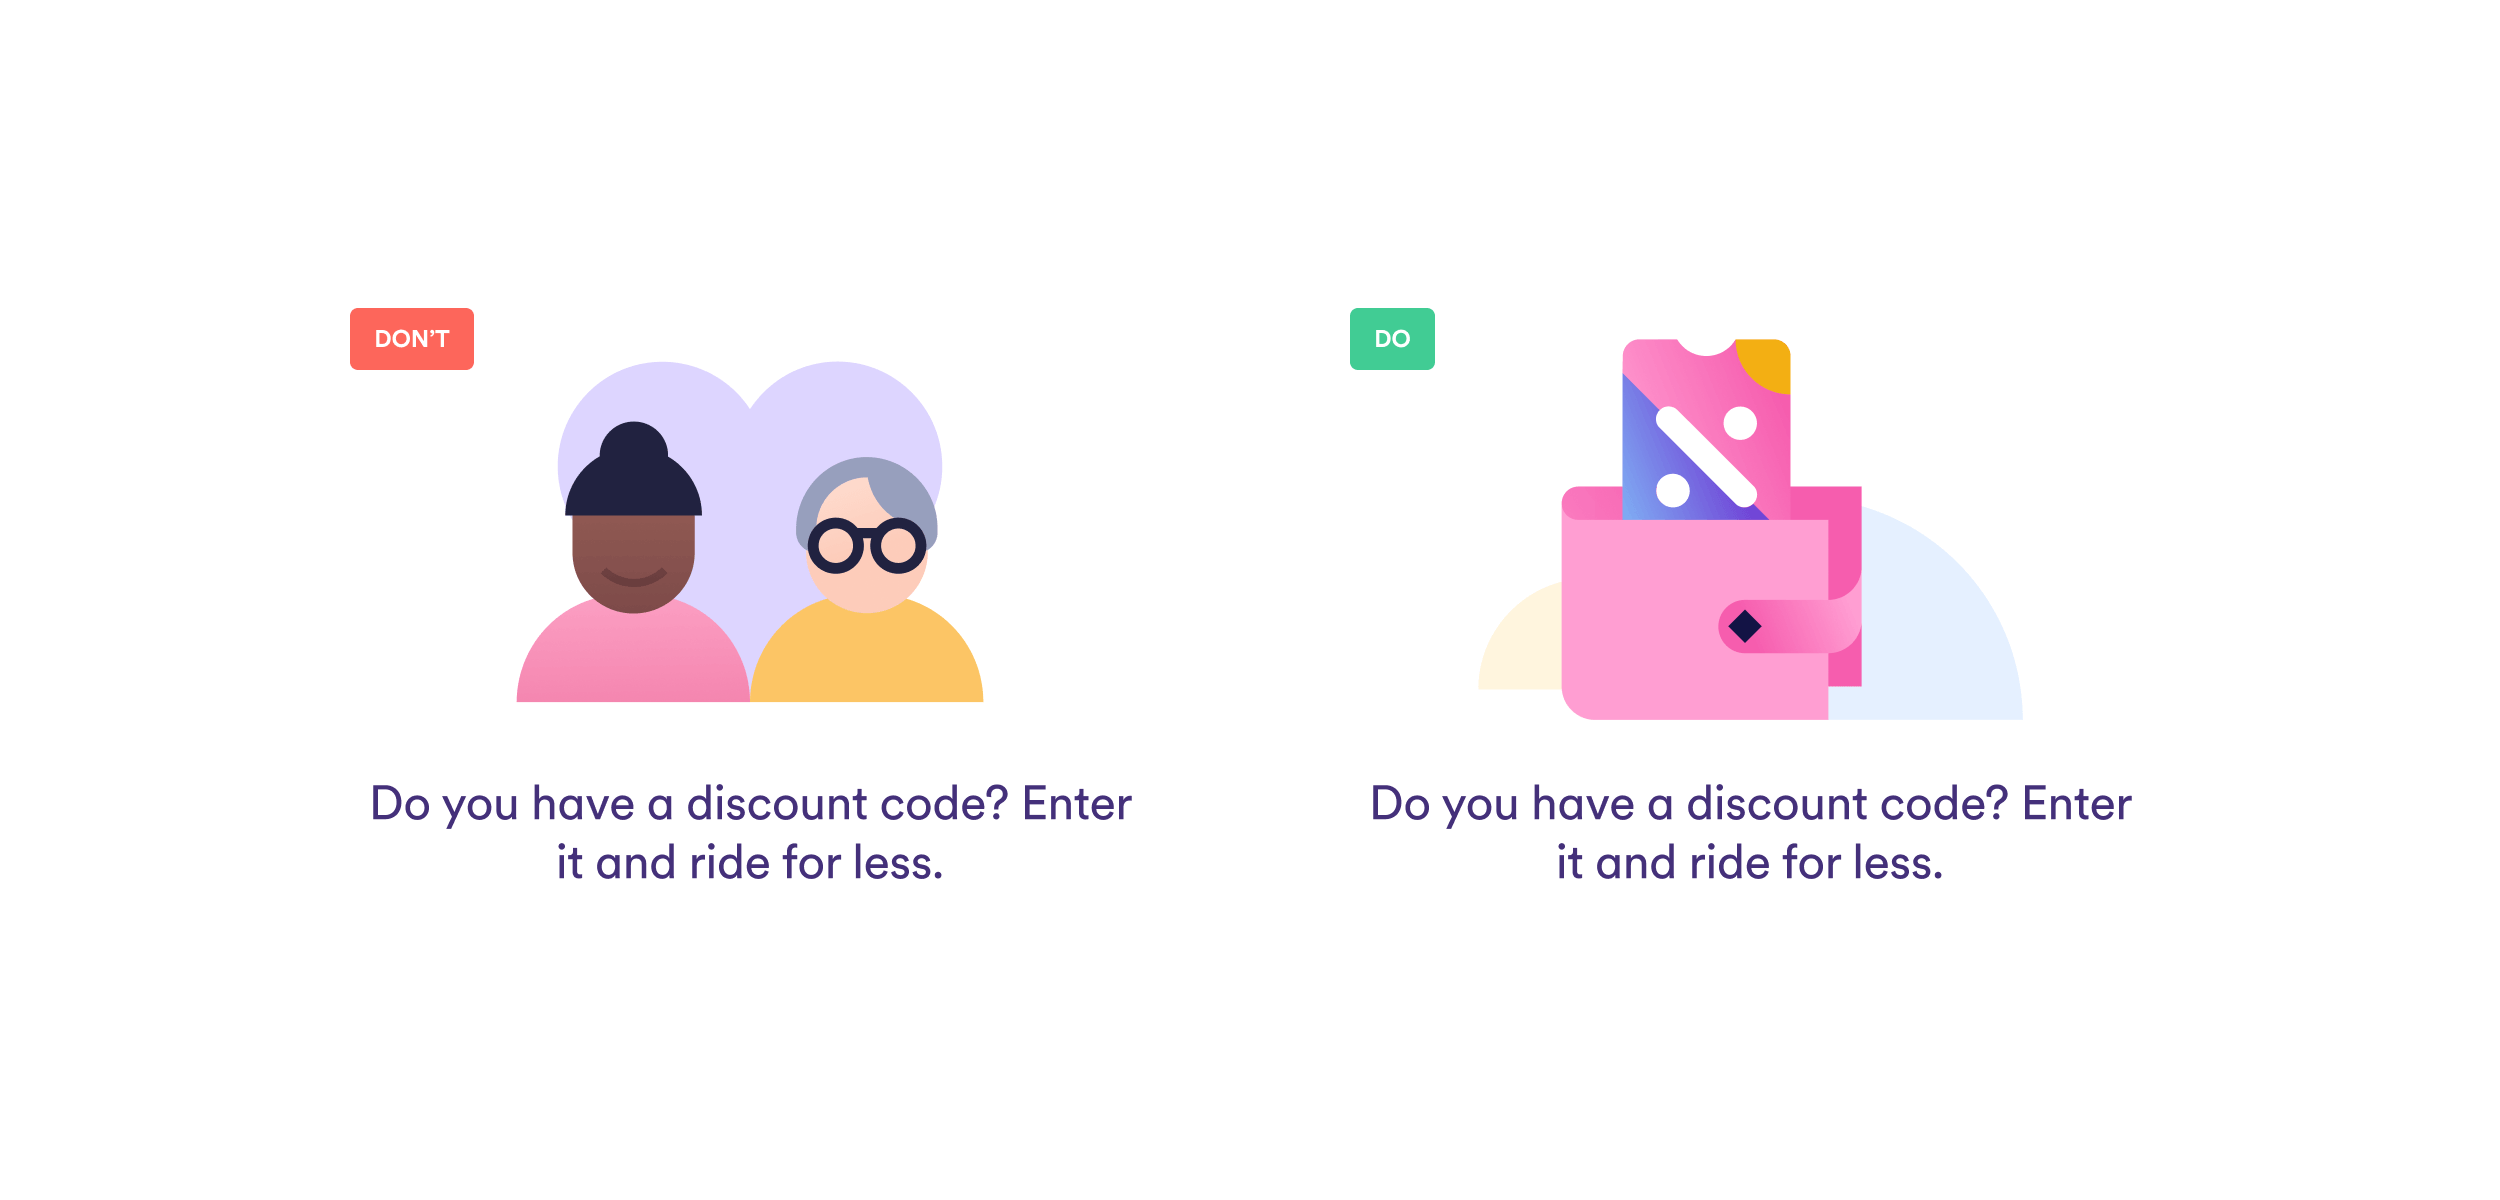 The image has two illustrations, followed by the text “Do you have a discount code? Enter it and ride for less.” The first, with a DON'T tag, has two human figures, and the second, with a DO tag, is a wallet with a discount code.